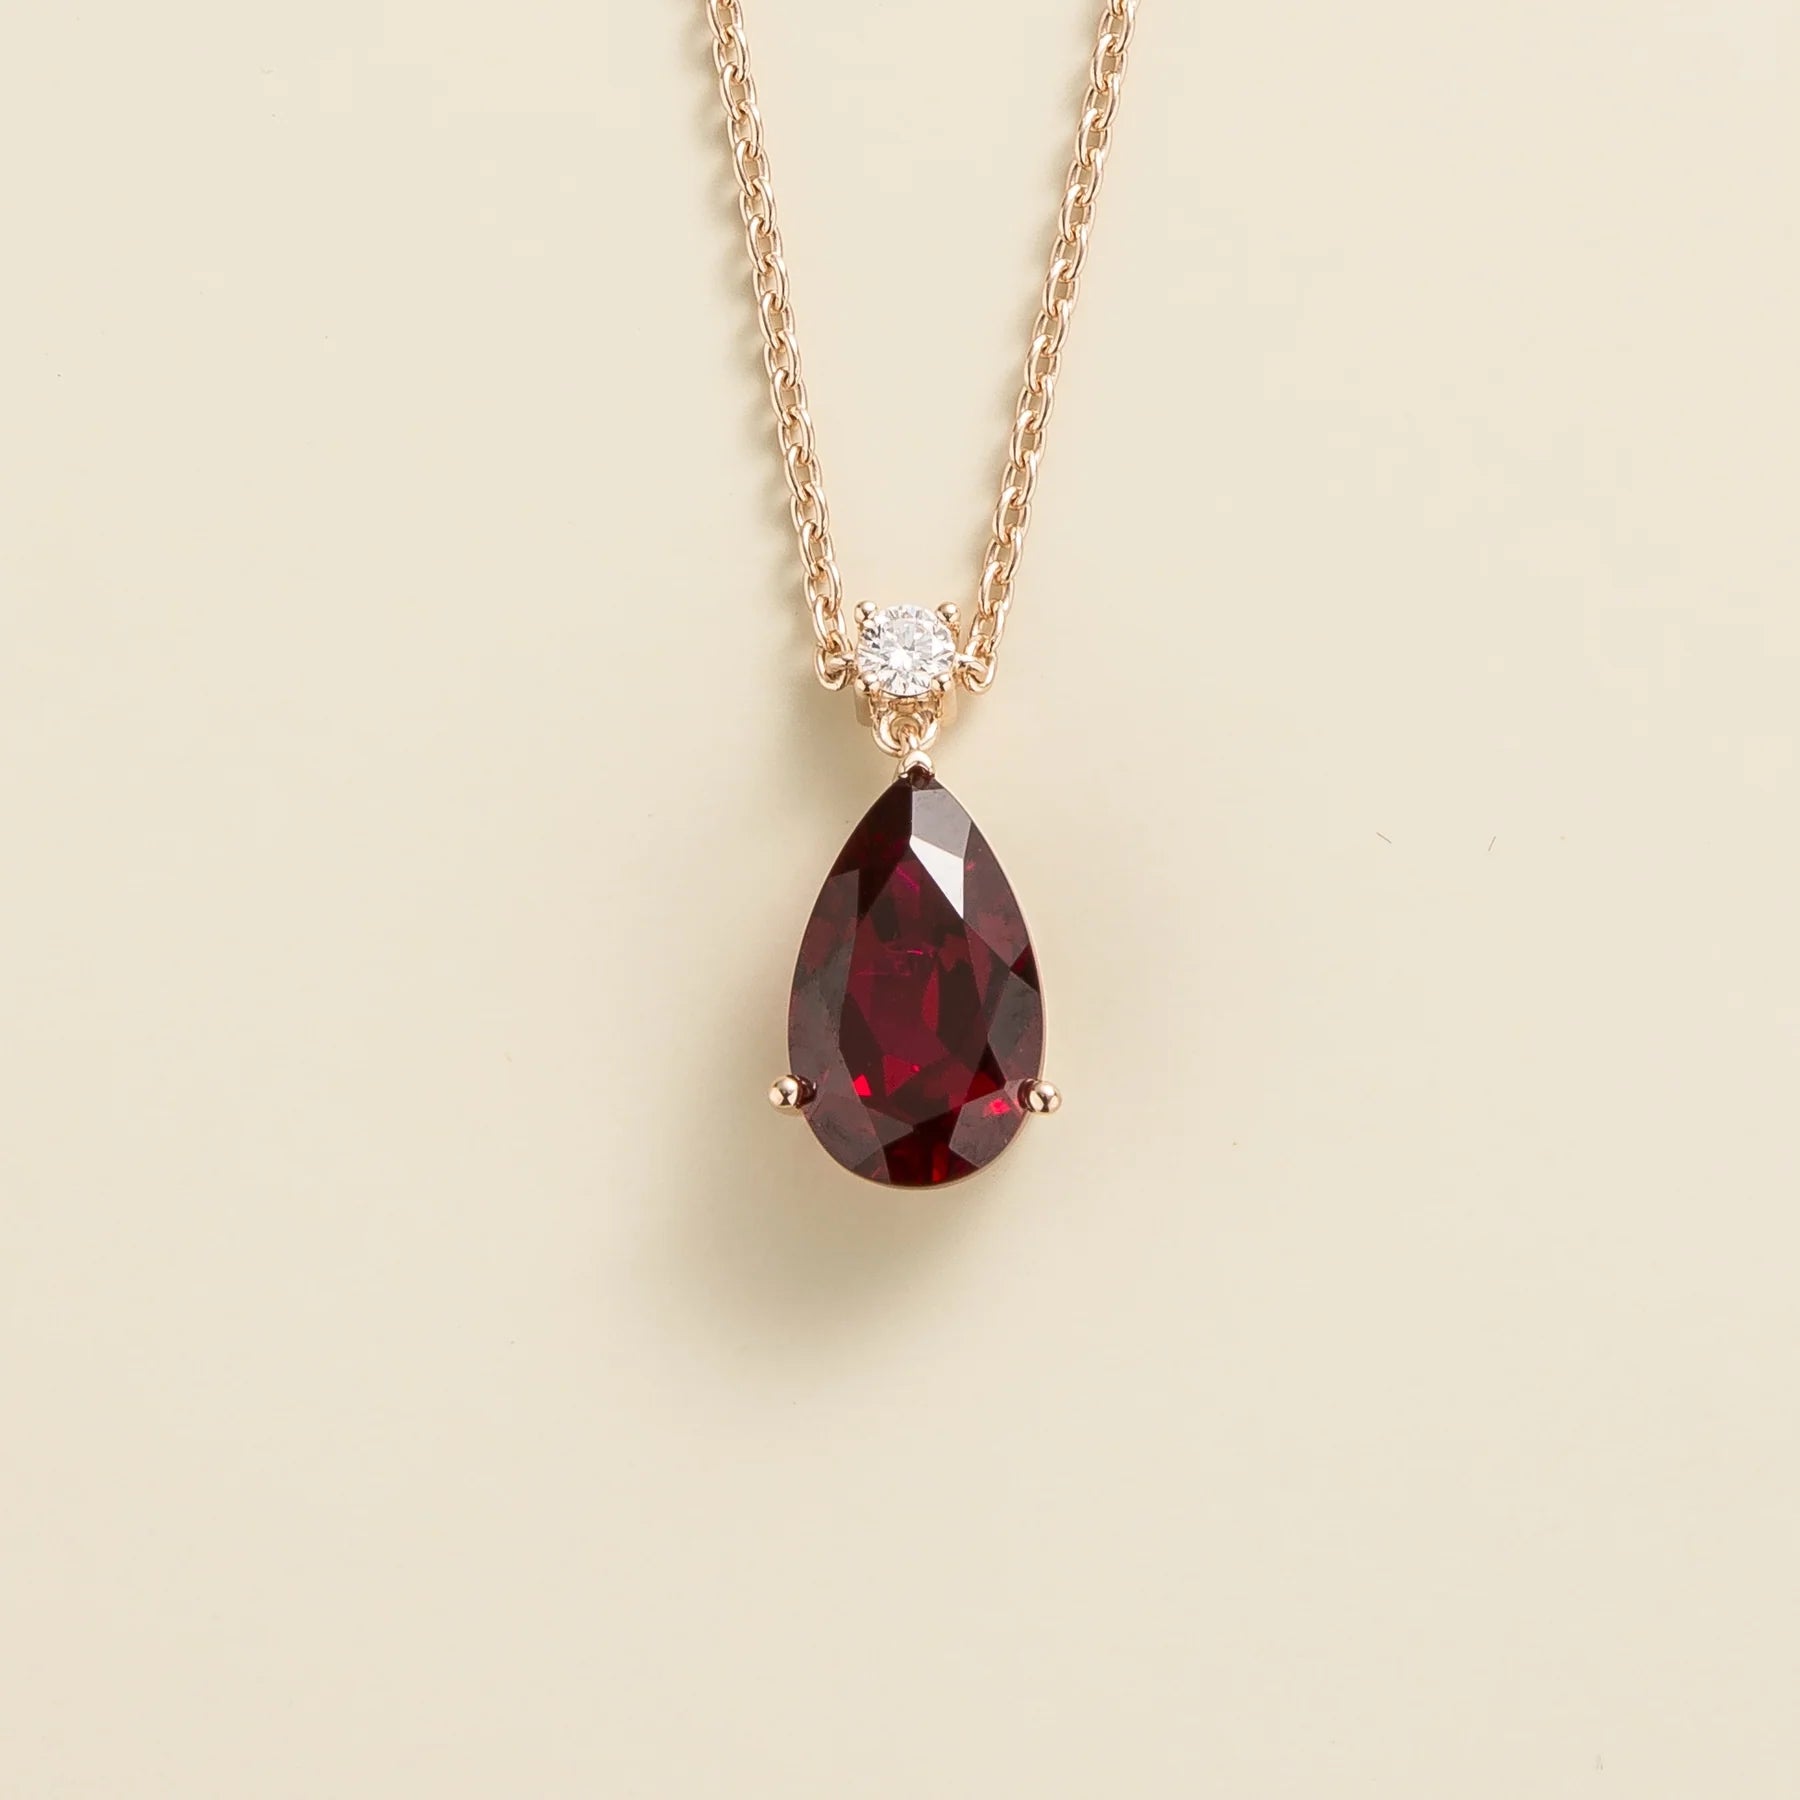 Ruby Necklace Juvetti Jewellery London UK Ori Large Pendant Necklace In Ruby and Diamond Set In Rose Gold